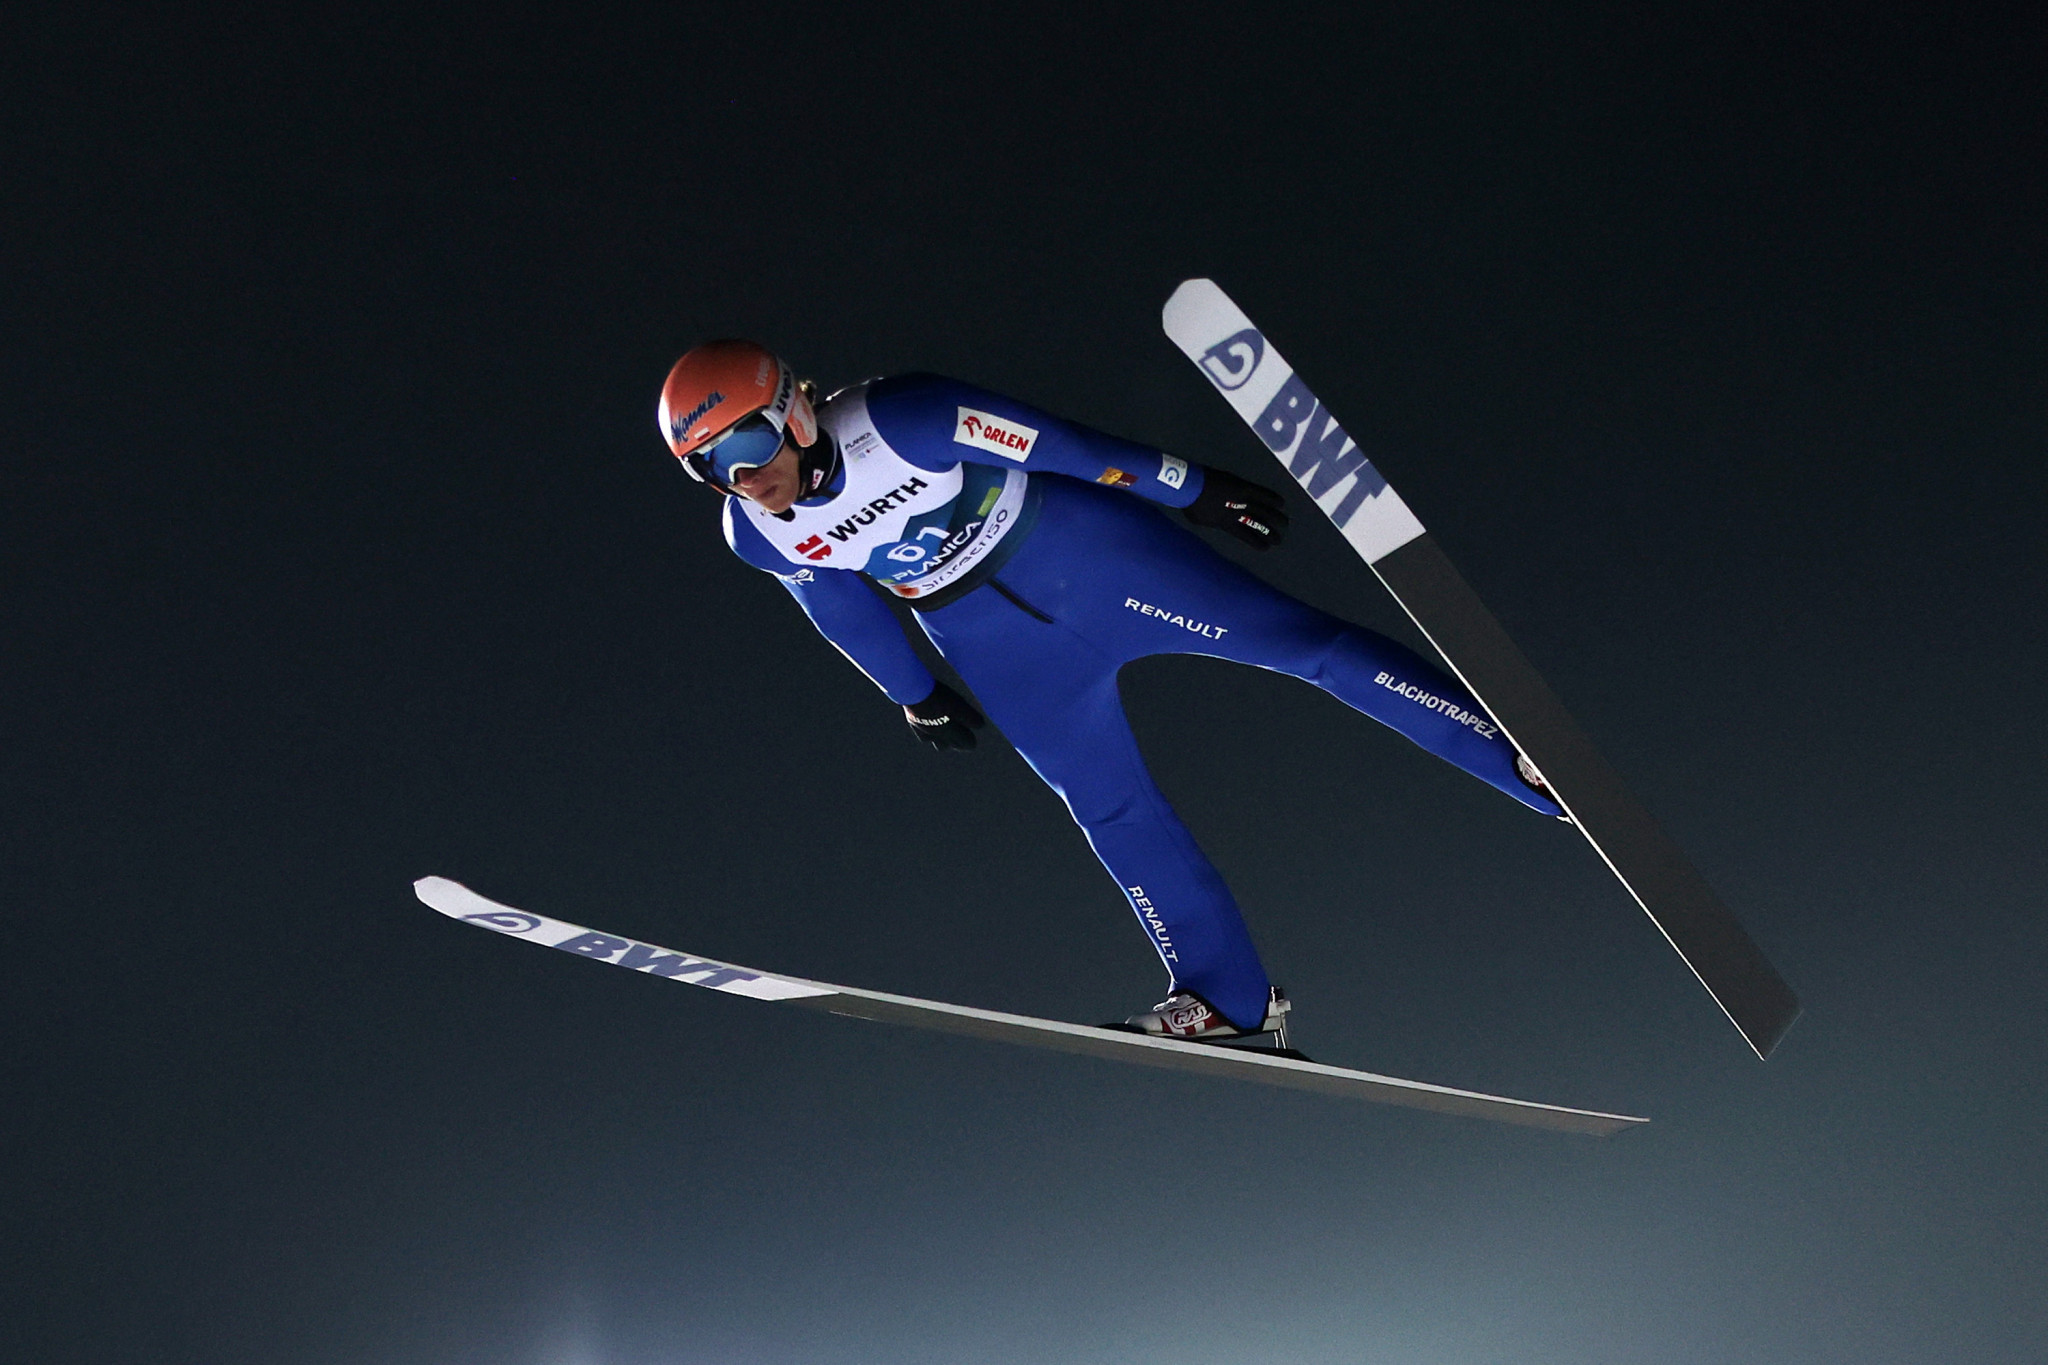 Poland's two-time Olympic medallist Dawid Kubacki is set to compete in summer ski jumping for the first time at Kraków-Małopolska 2023 ©Getty Images